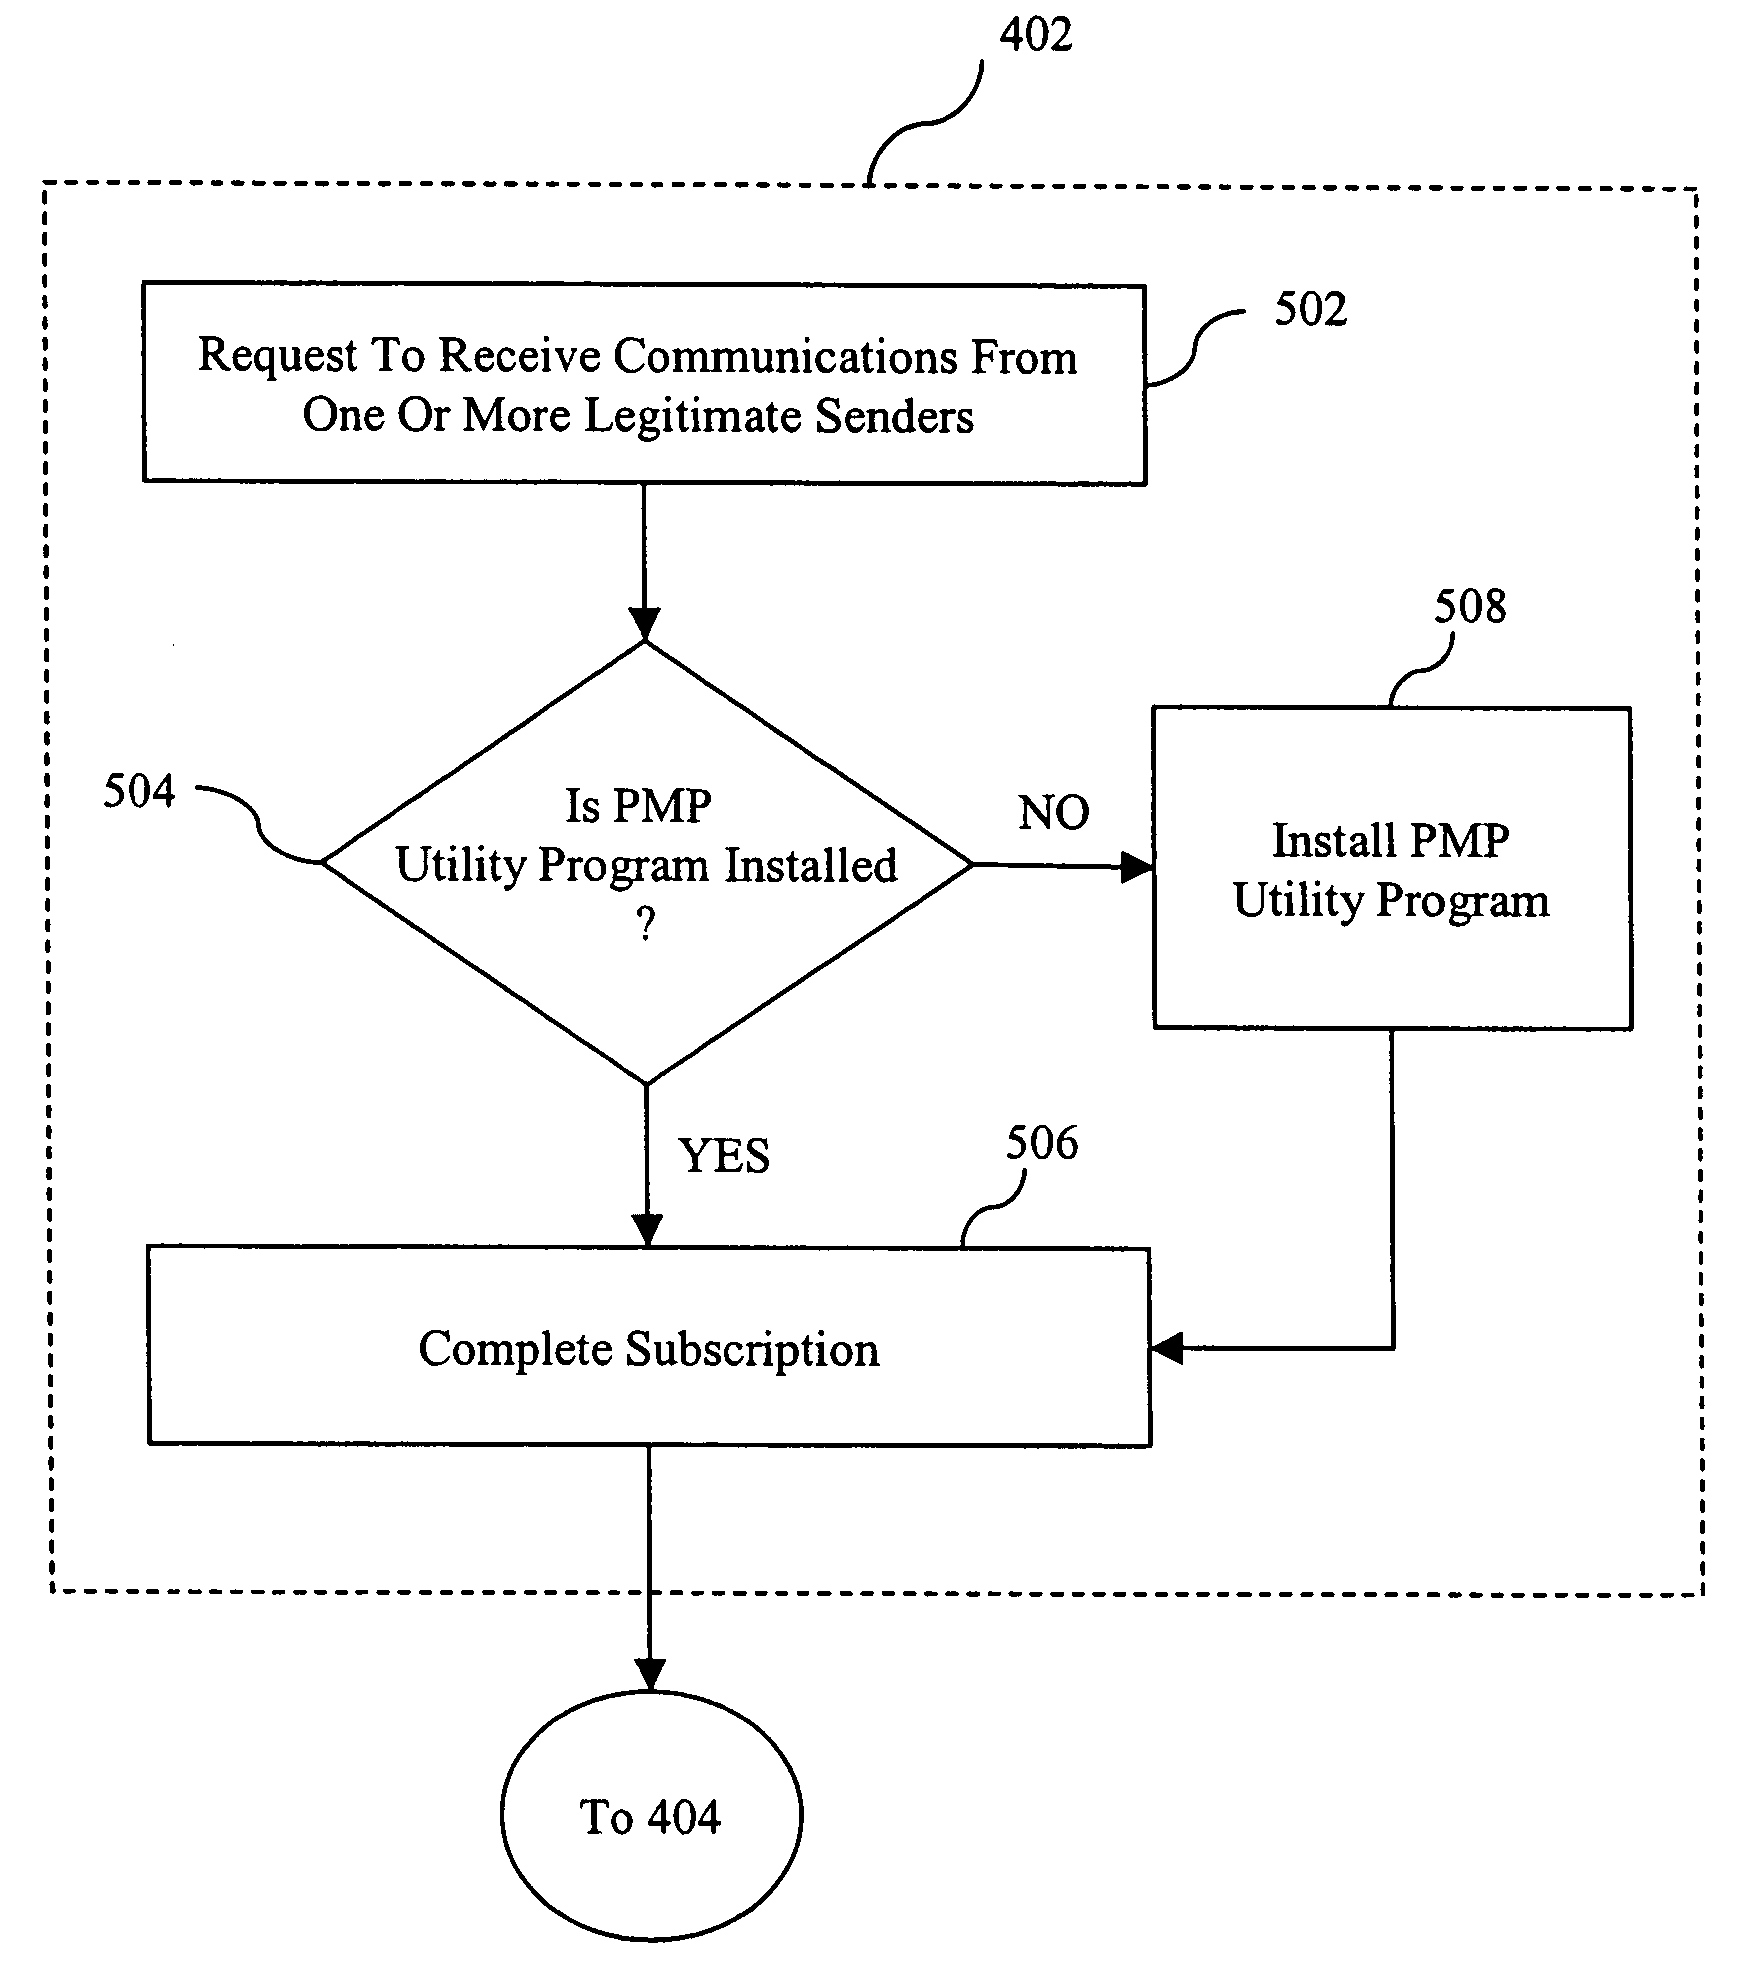 Systems and methods for producing, managing, delivering, retrieving, and/or tracking permission based communications